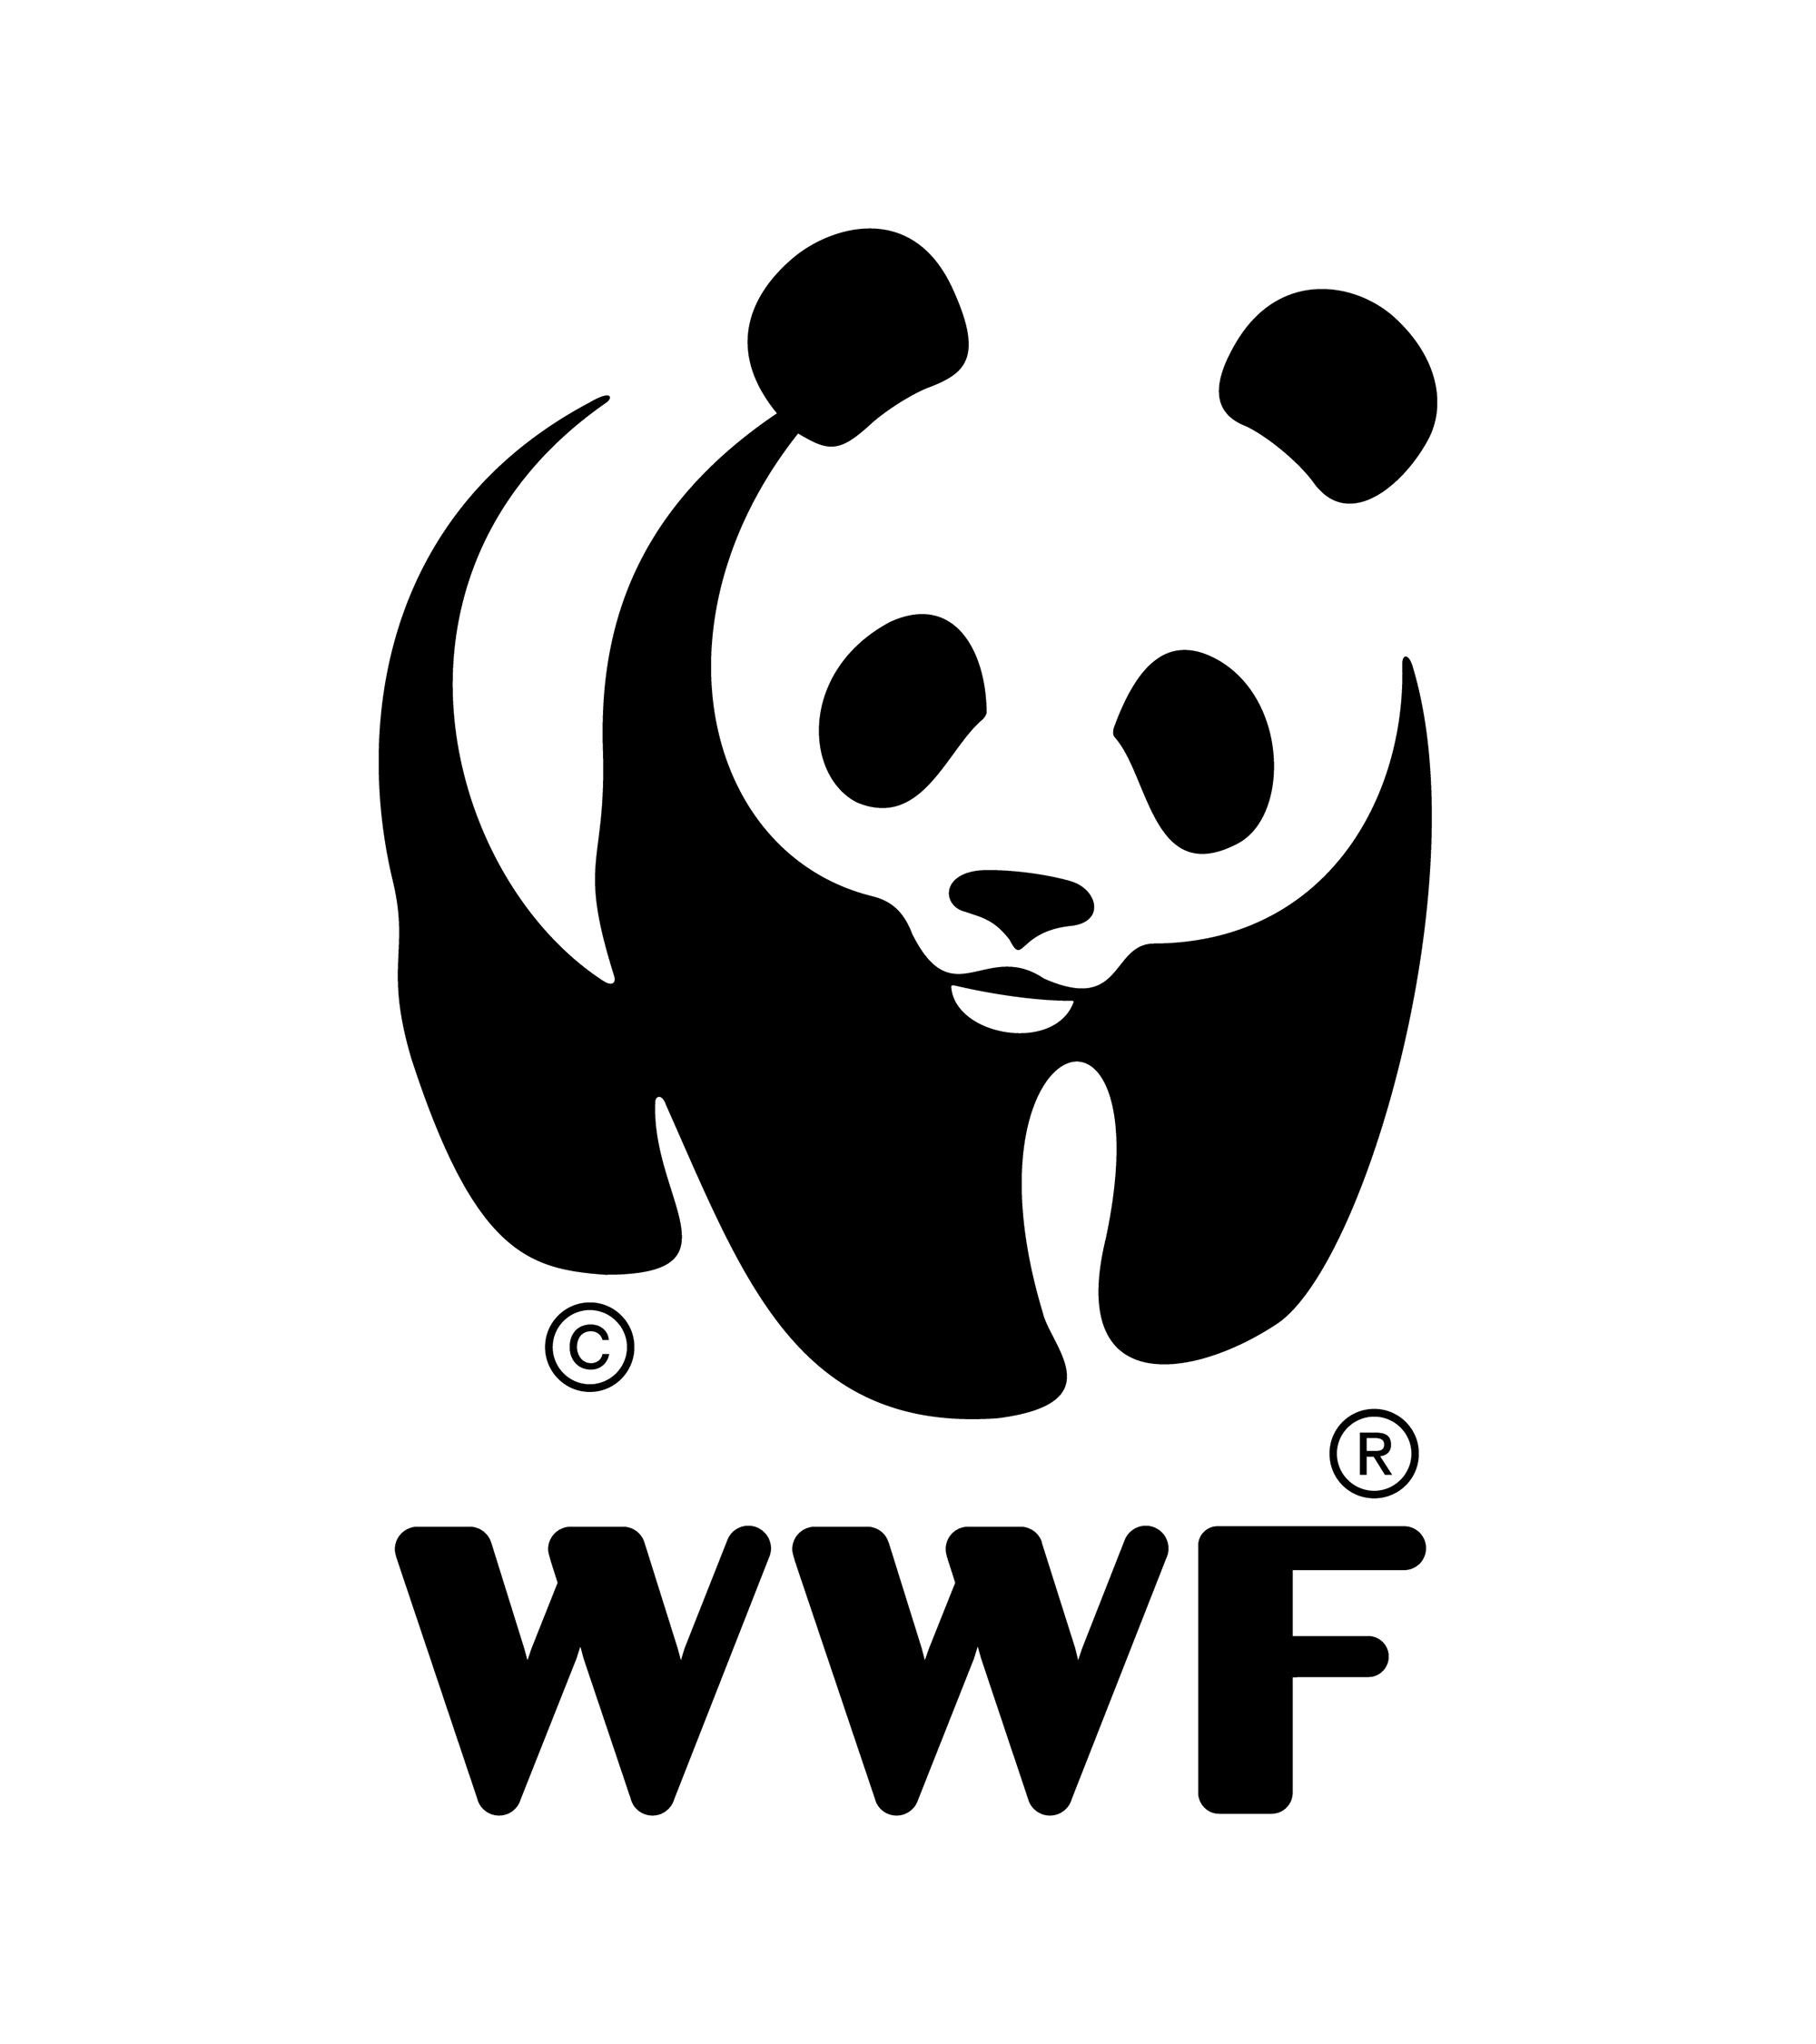 MOBIAK is developing a partnership with WWF